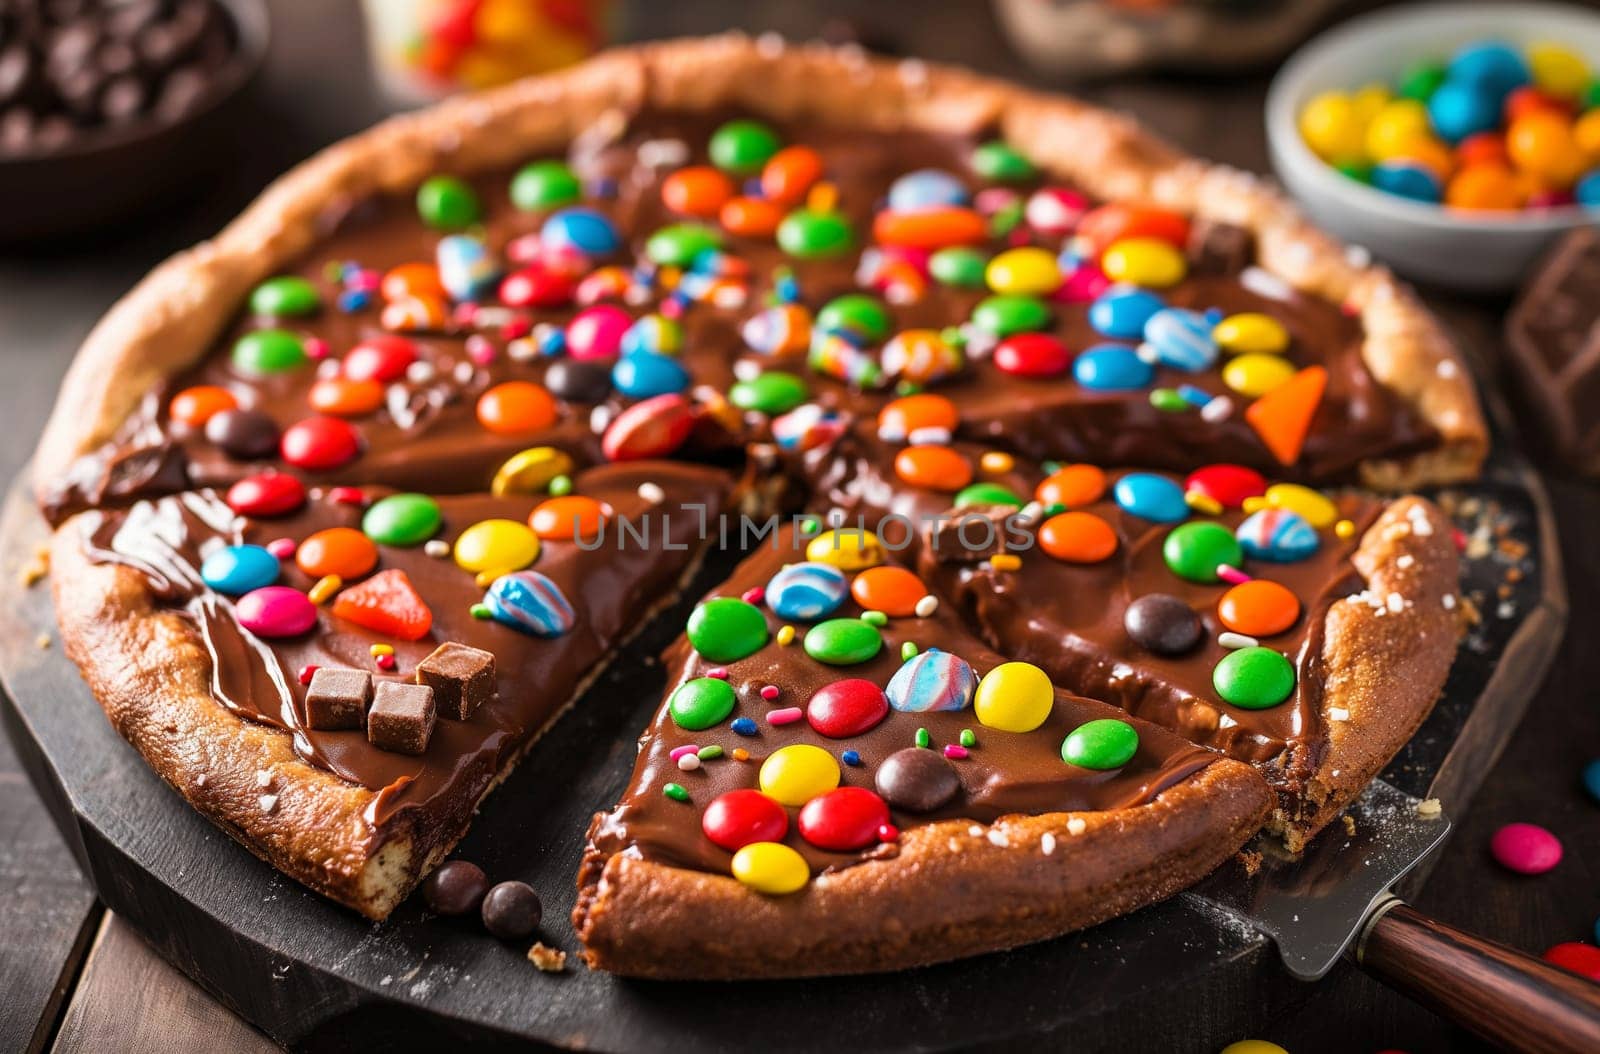 Chocolate covered pizza, sliced and decorated with a colorful mixture of candies, glazed chocolate pieces and sprinkles